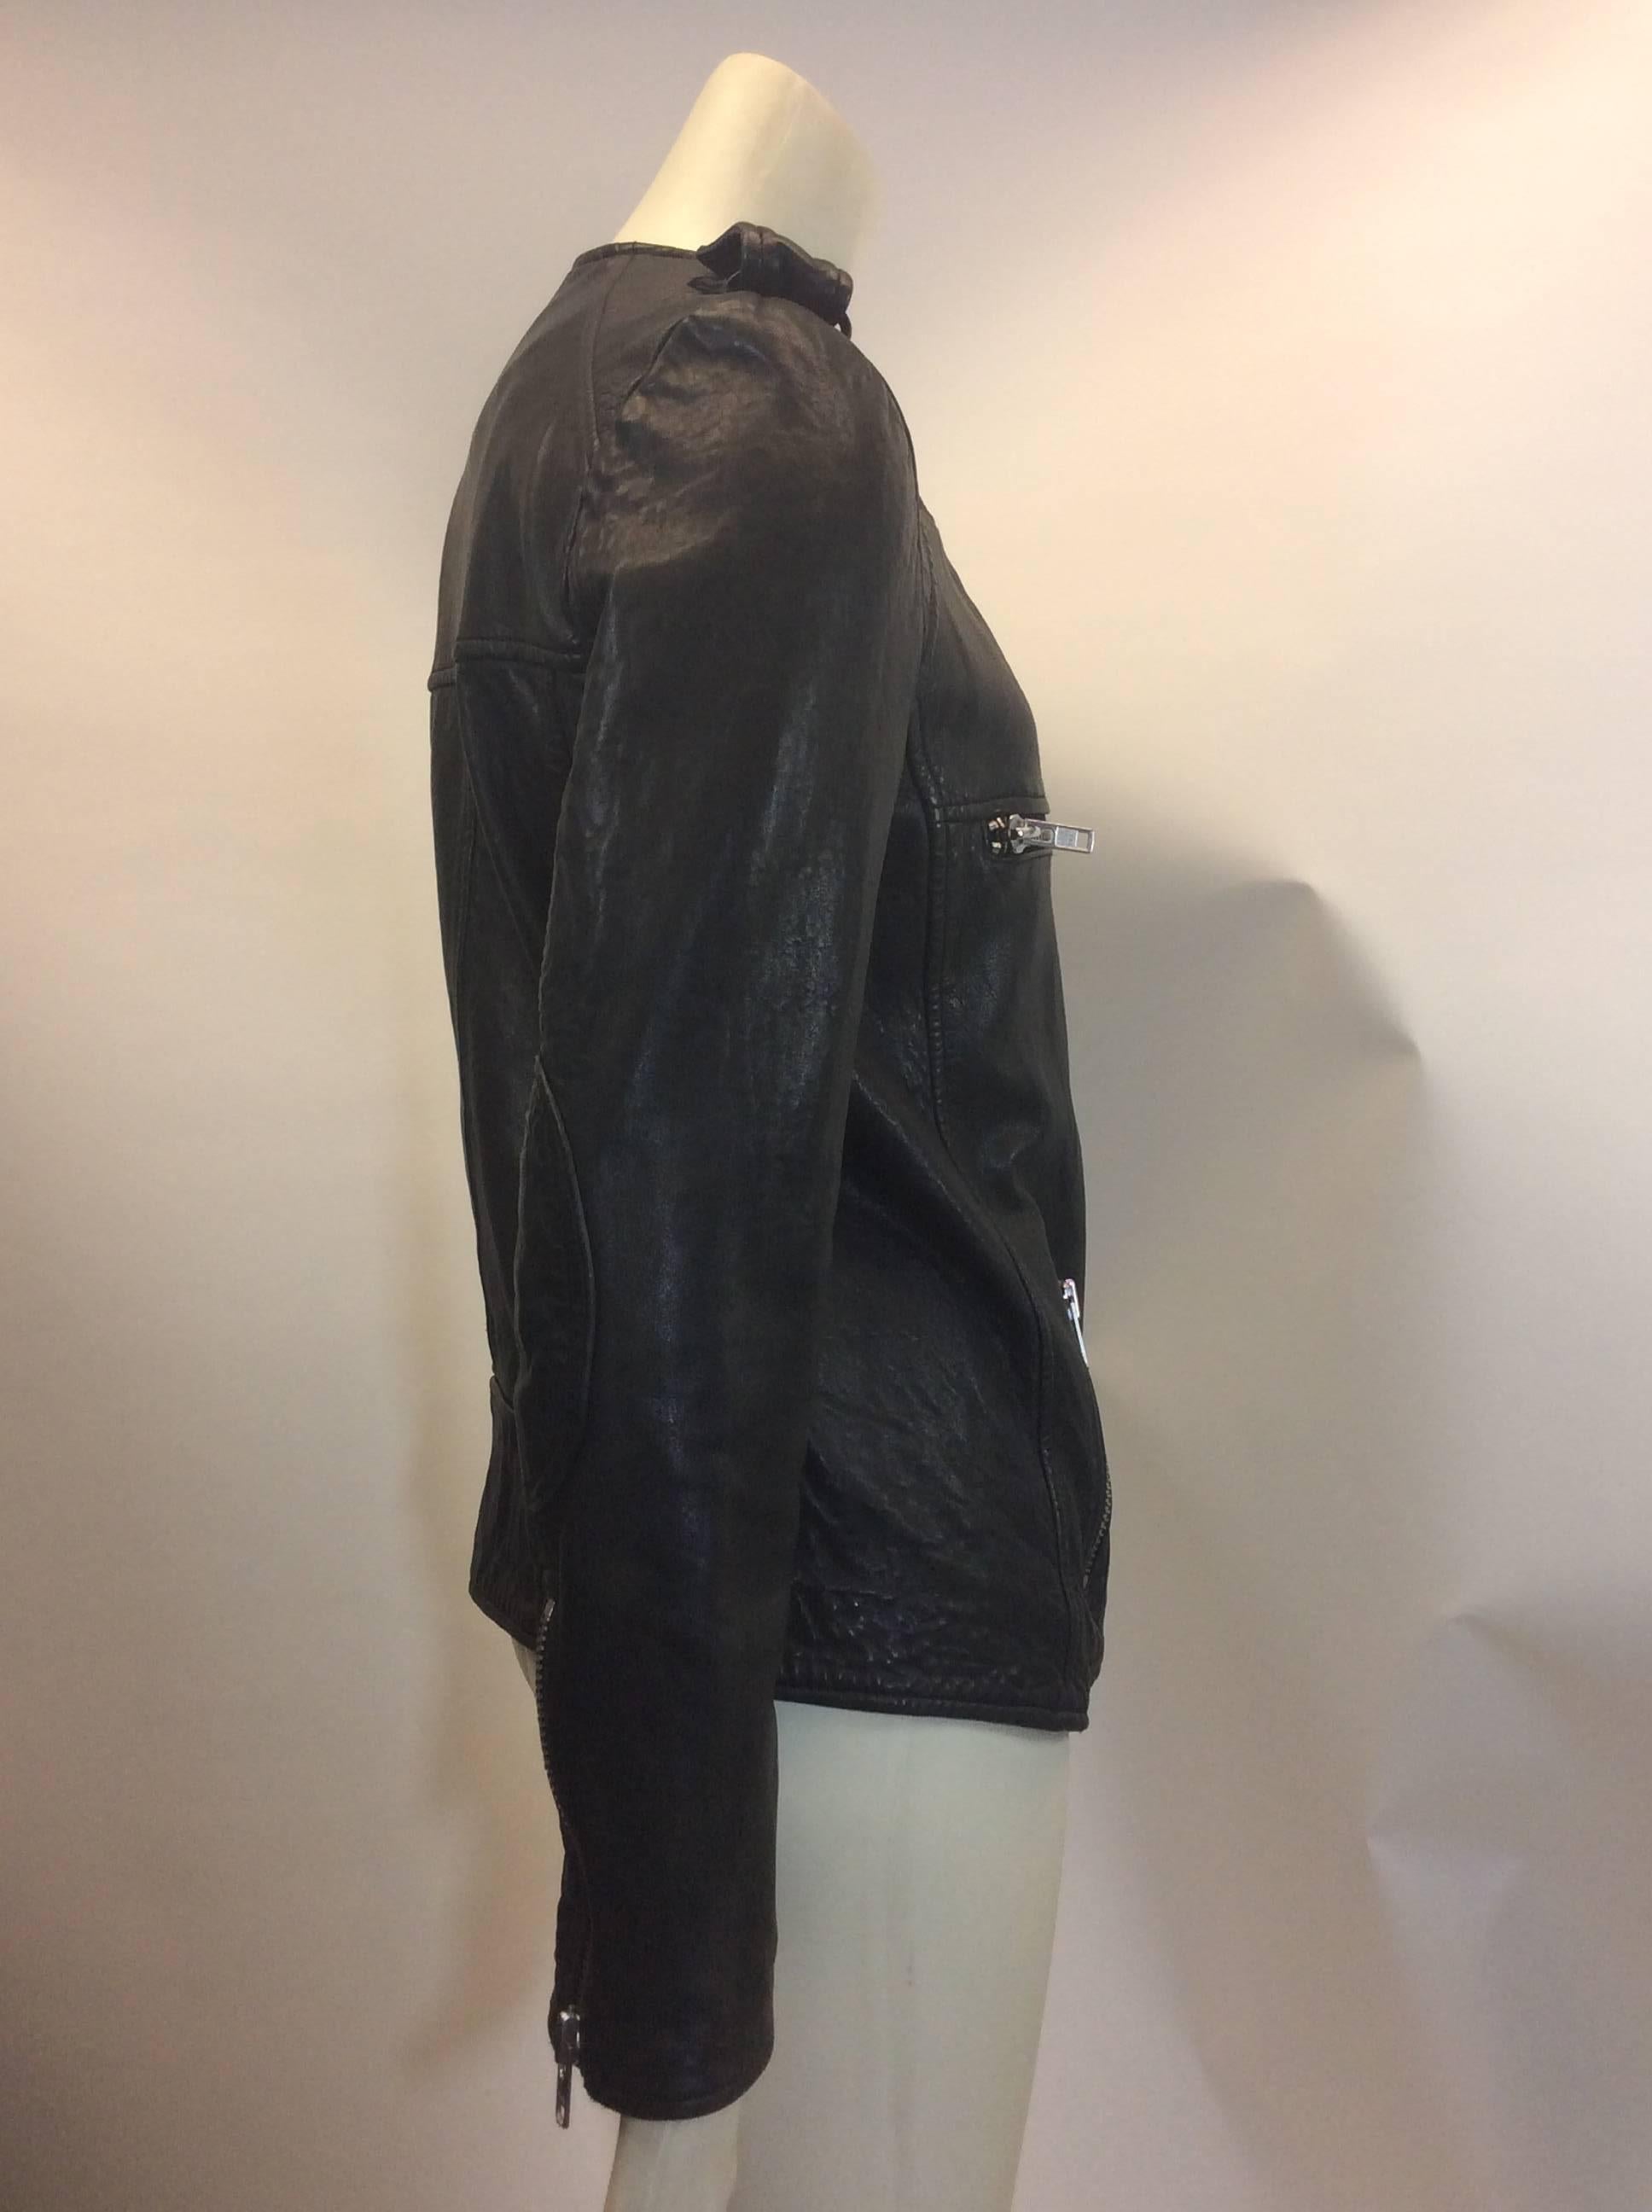 Isabel Marant Leather Moto Jacket 
Made in India
Size 36
$499
100% lambskin
Fully lined interior
Longer in the front, shorter in the back
